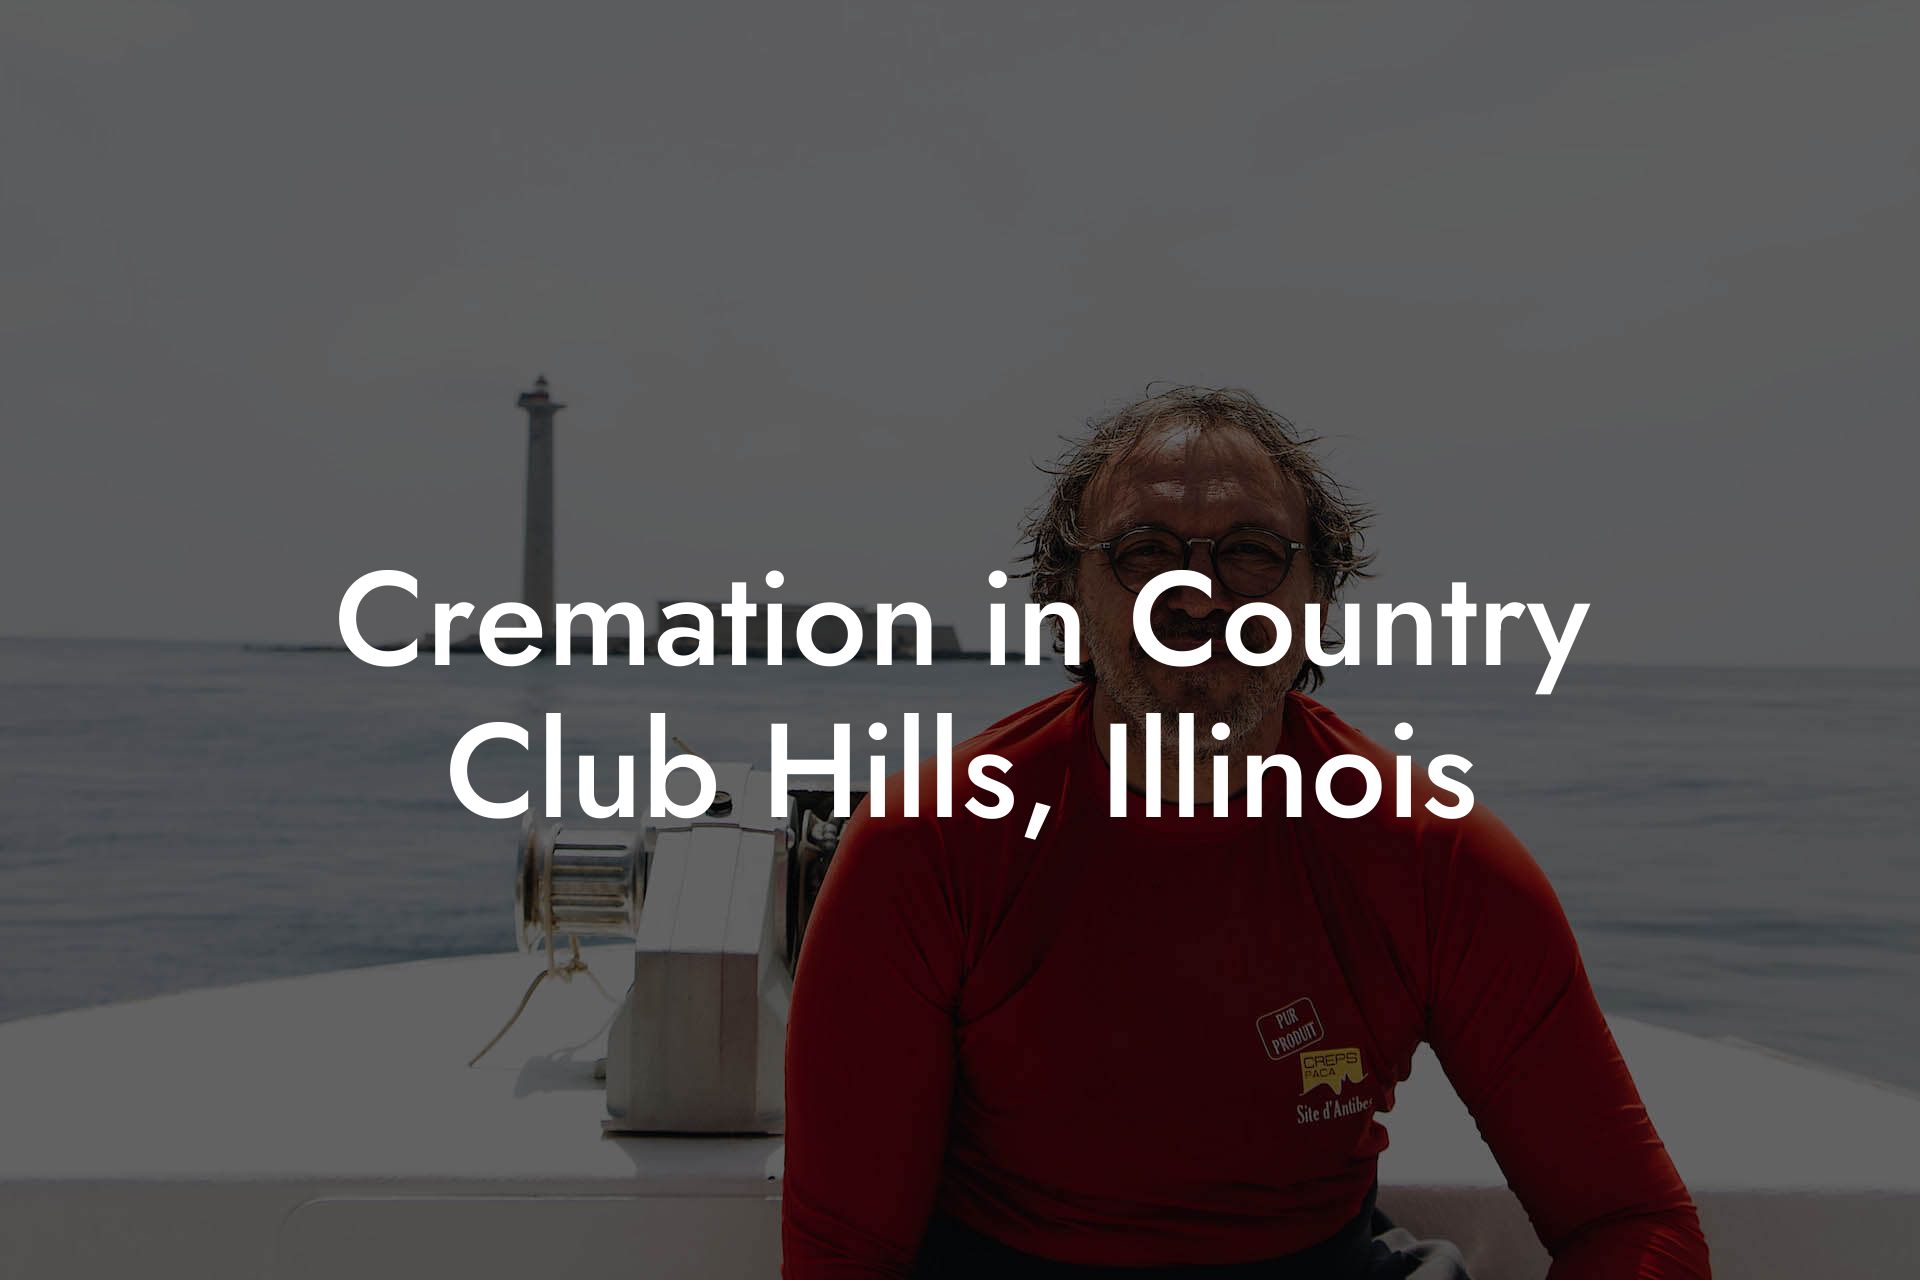 Cremation in Country Club Hills, Illinois